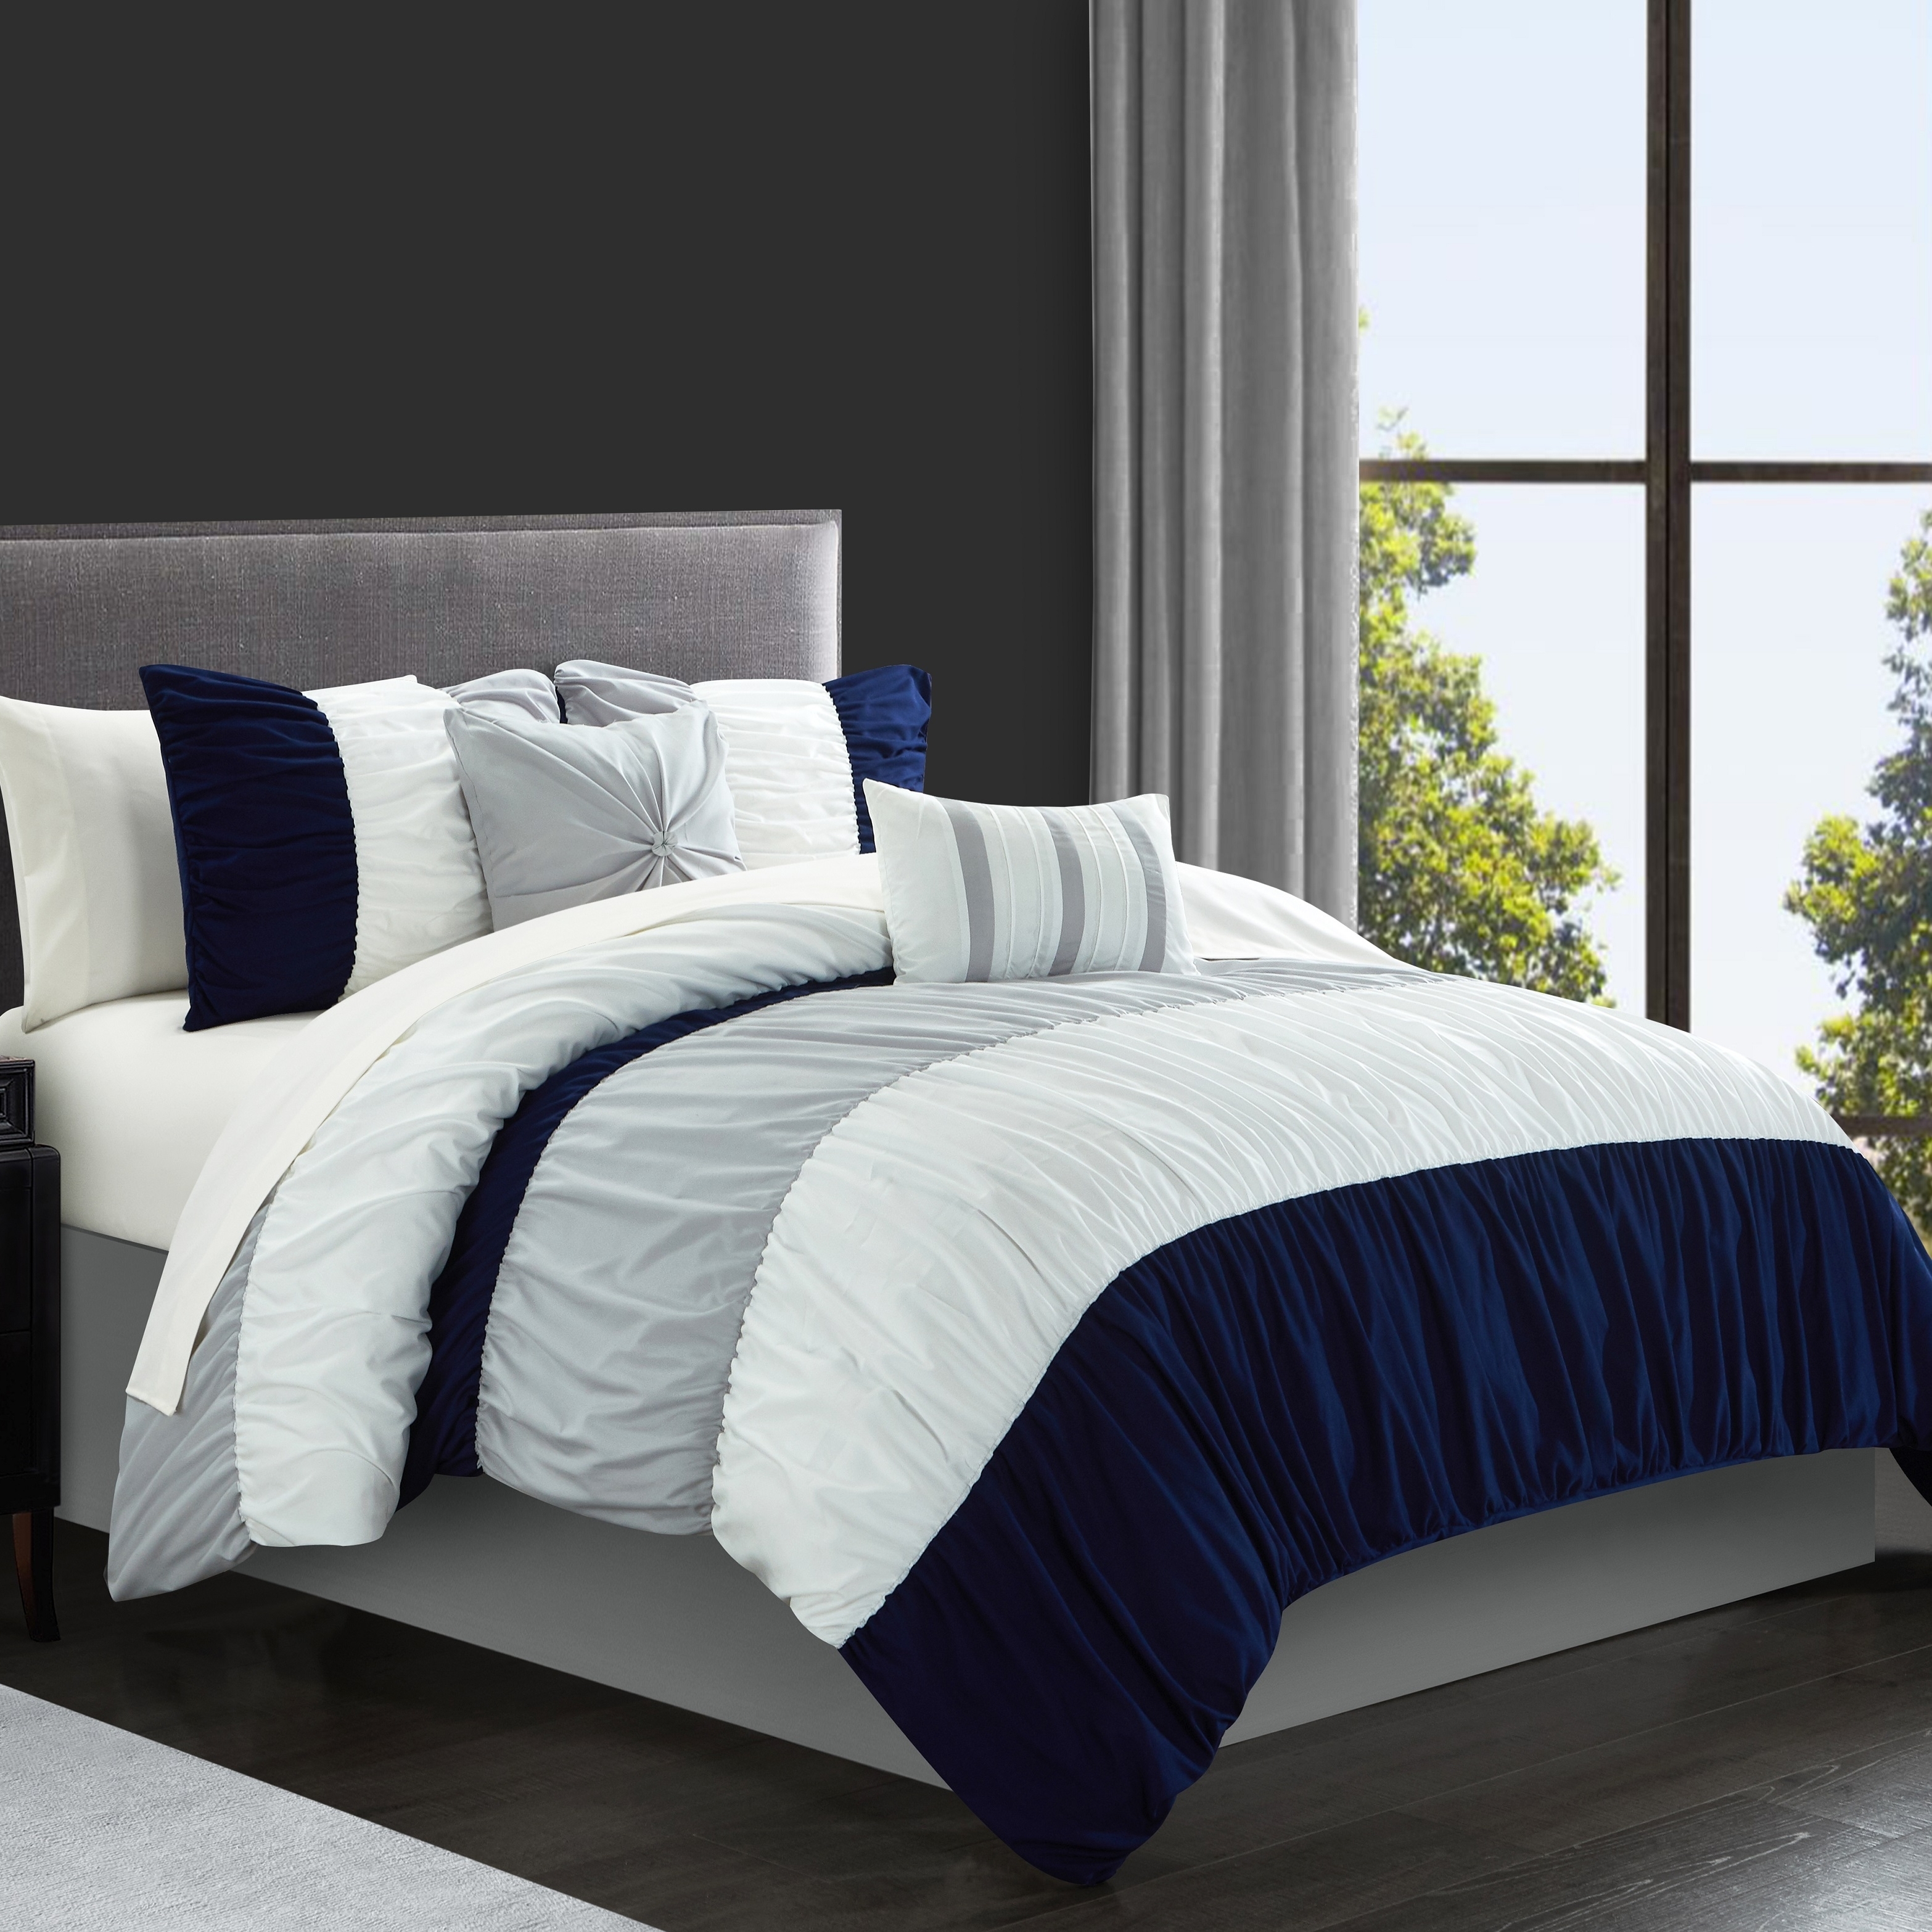 Faye 9 Or 7 Piece Comforter Ruched Color Block Bed In A Bag - Navy, Queen - 9 Piece